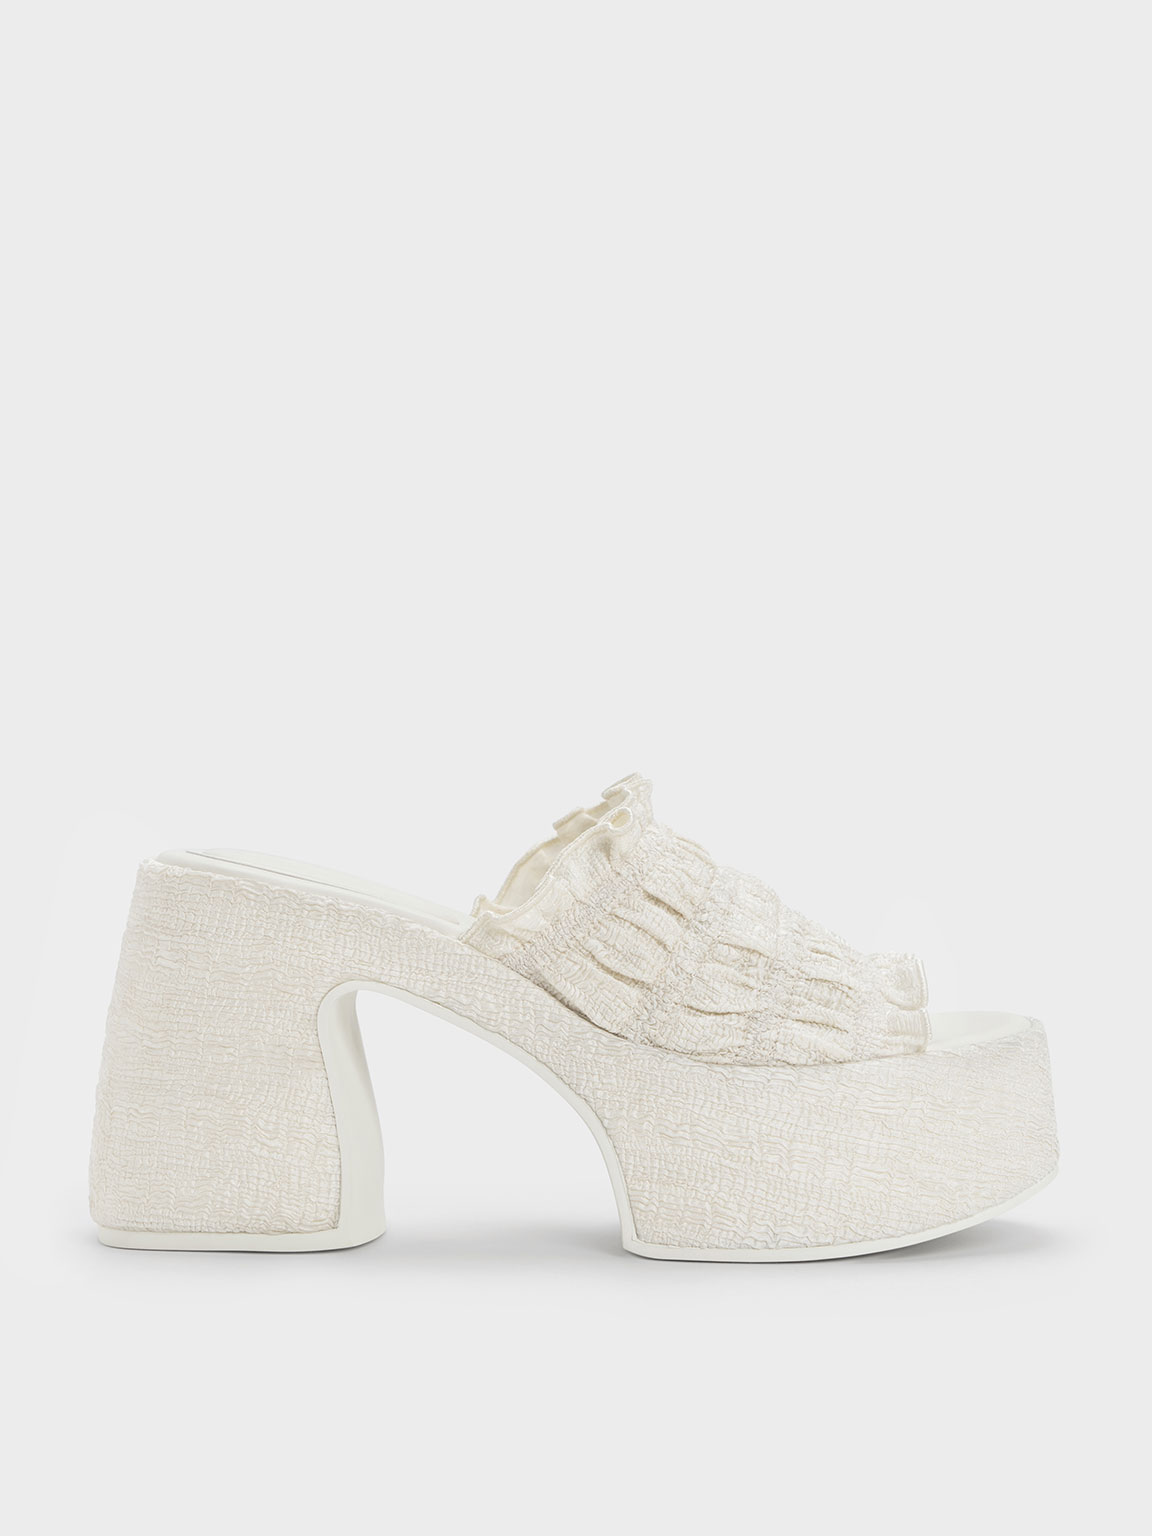 Charles & Keith Nuala Ruched Platform Mules In Cream